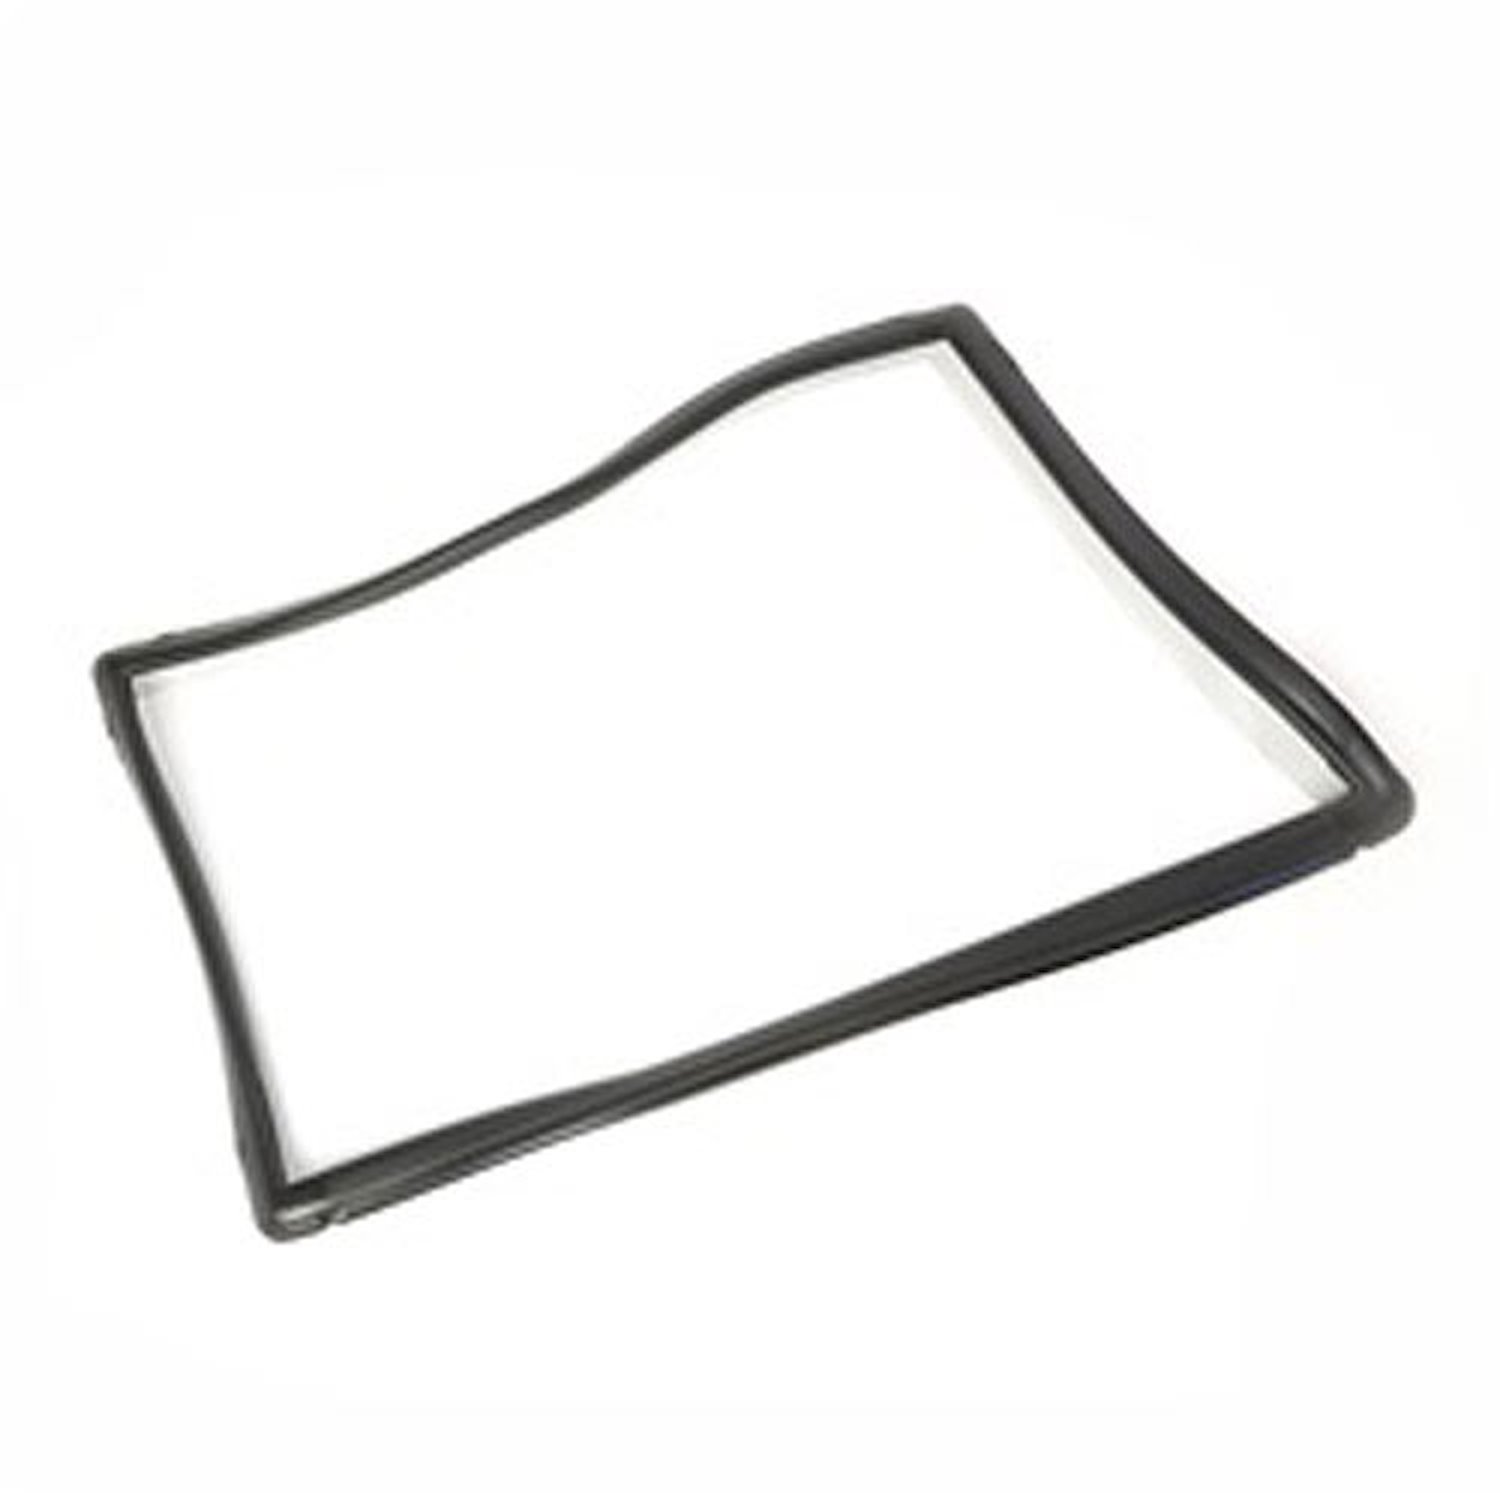 This right rear quarter window seal from Omix-ADA fits 84-96 Jeep Cherokee.